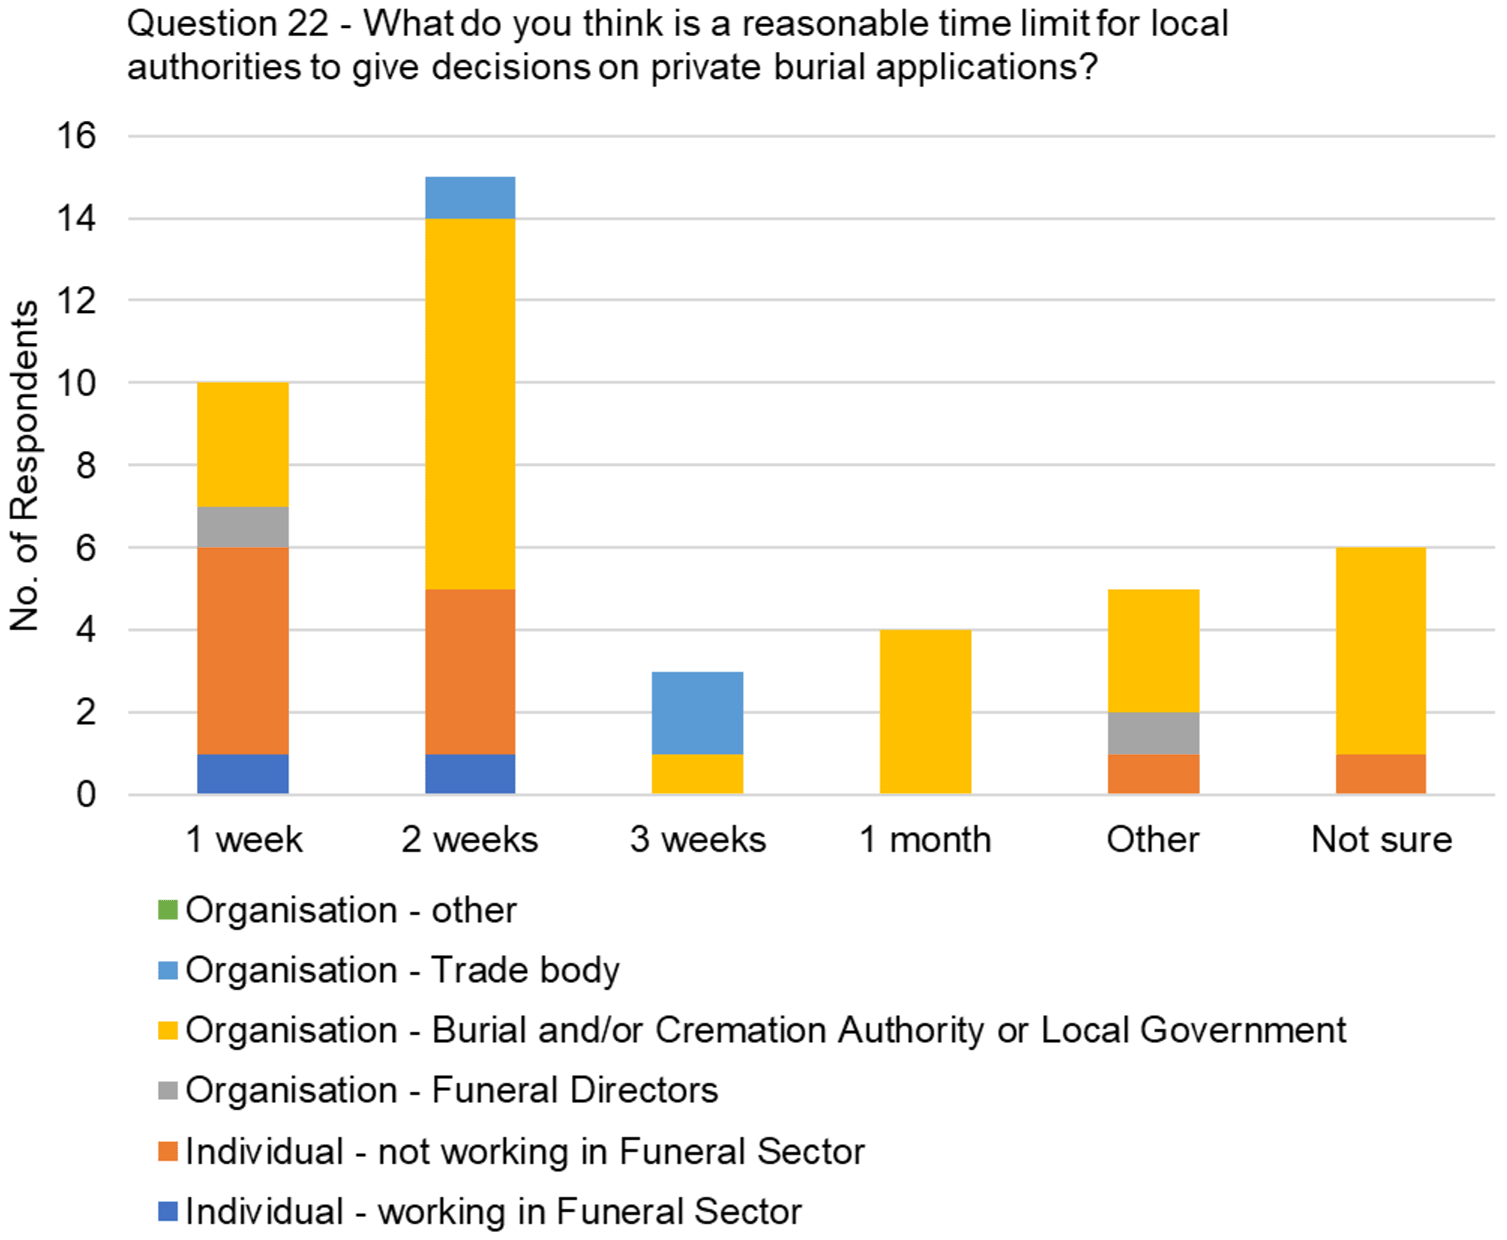 The graph visually presents the data from table 16, focussing on the responses to the question, "What do you think is a reasonable time limit for local authorities to give decisions on private burial applications?"